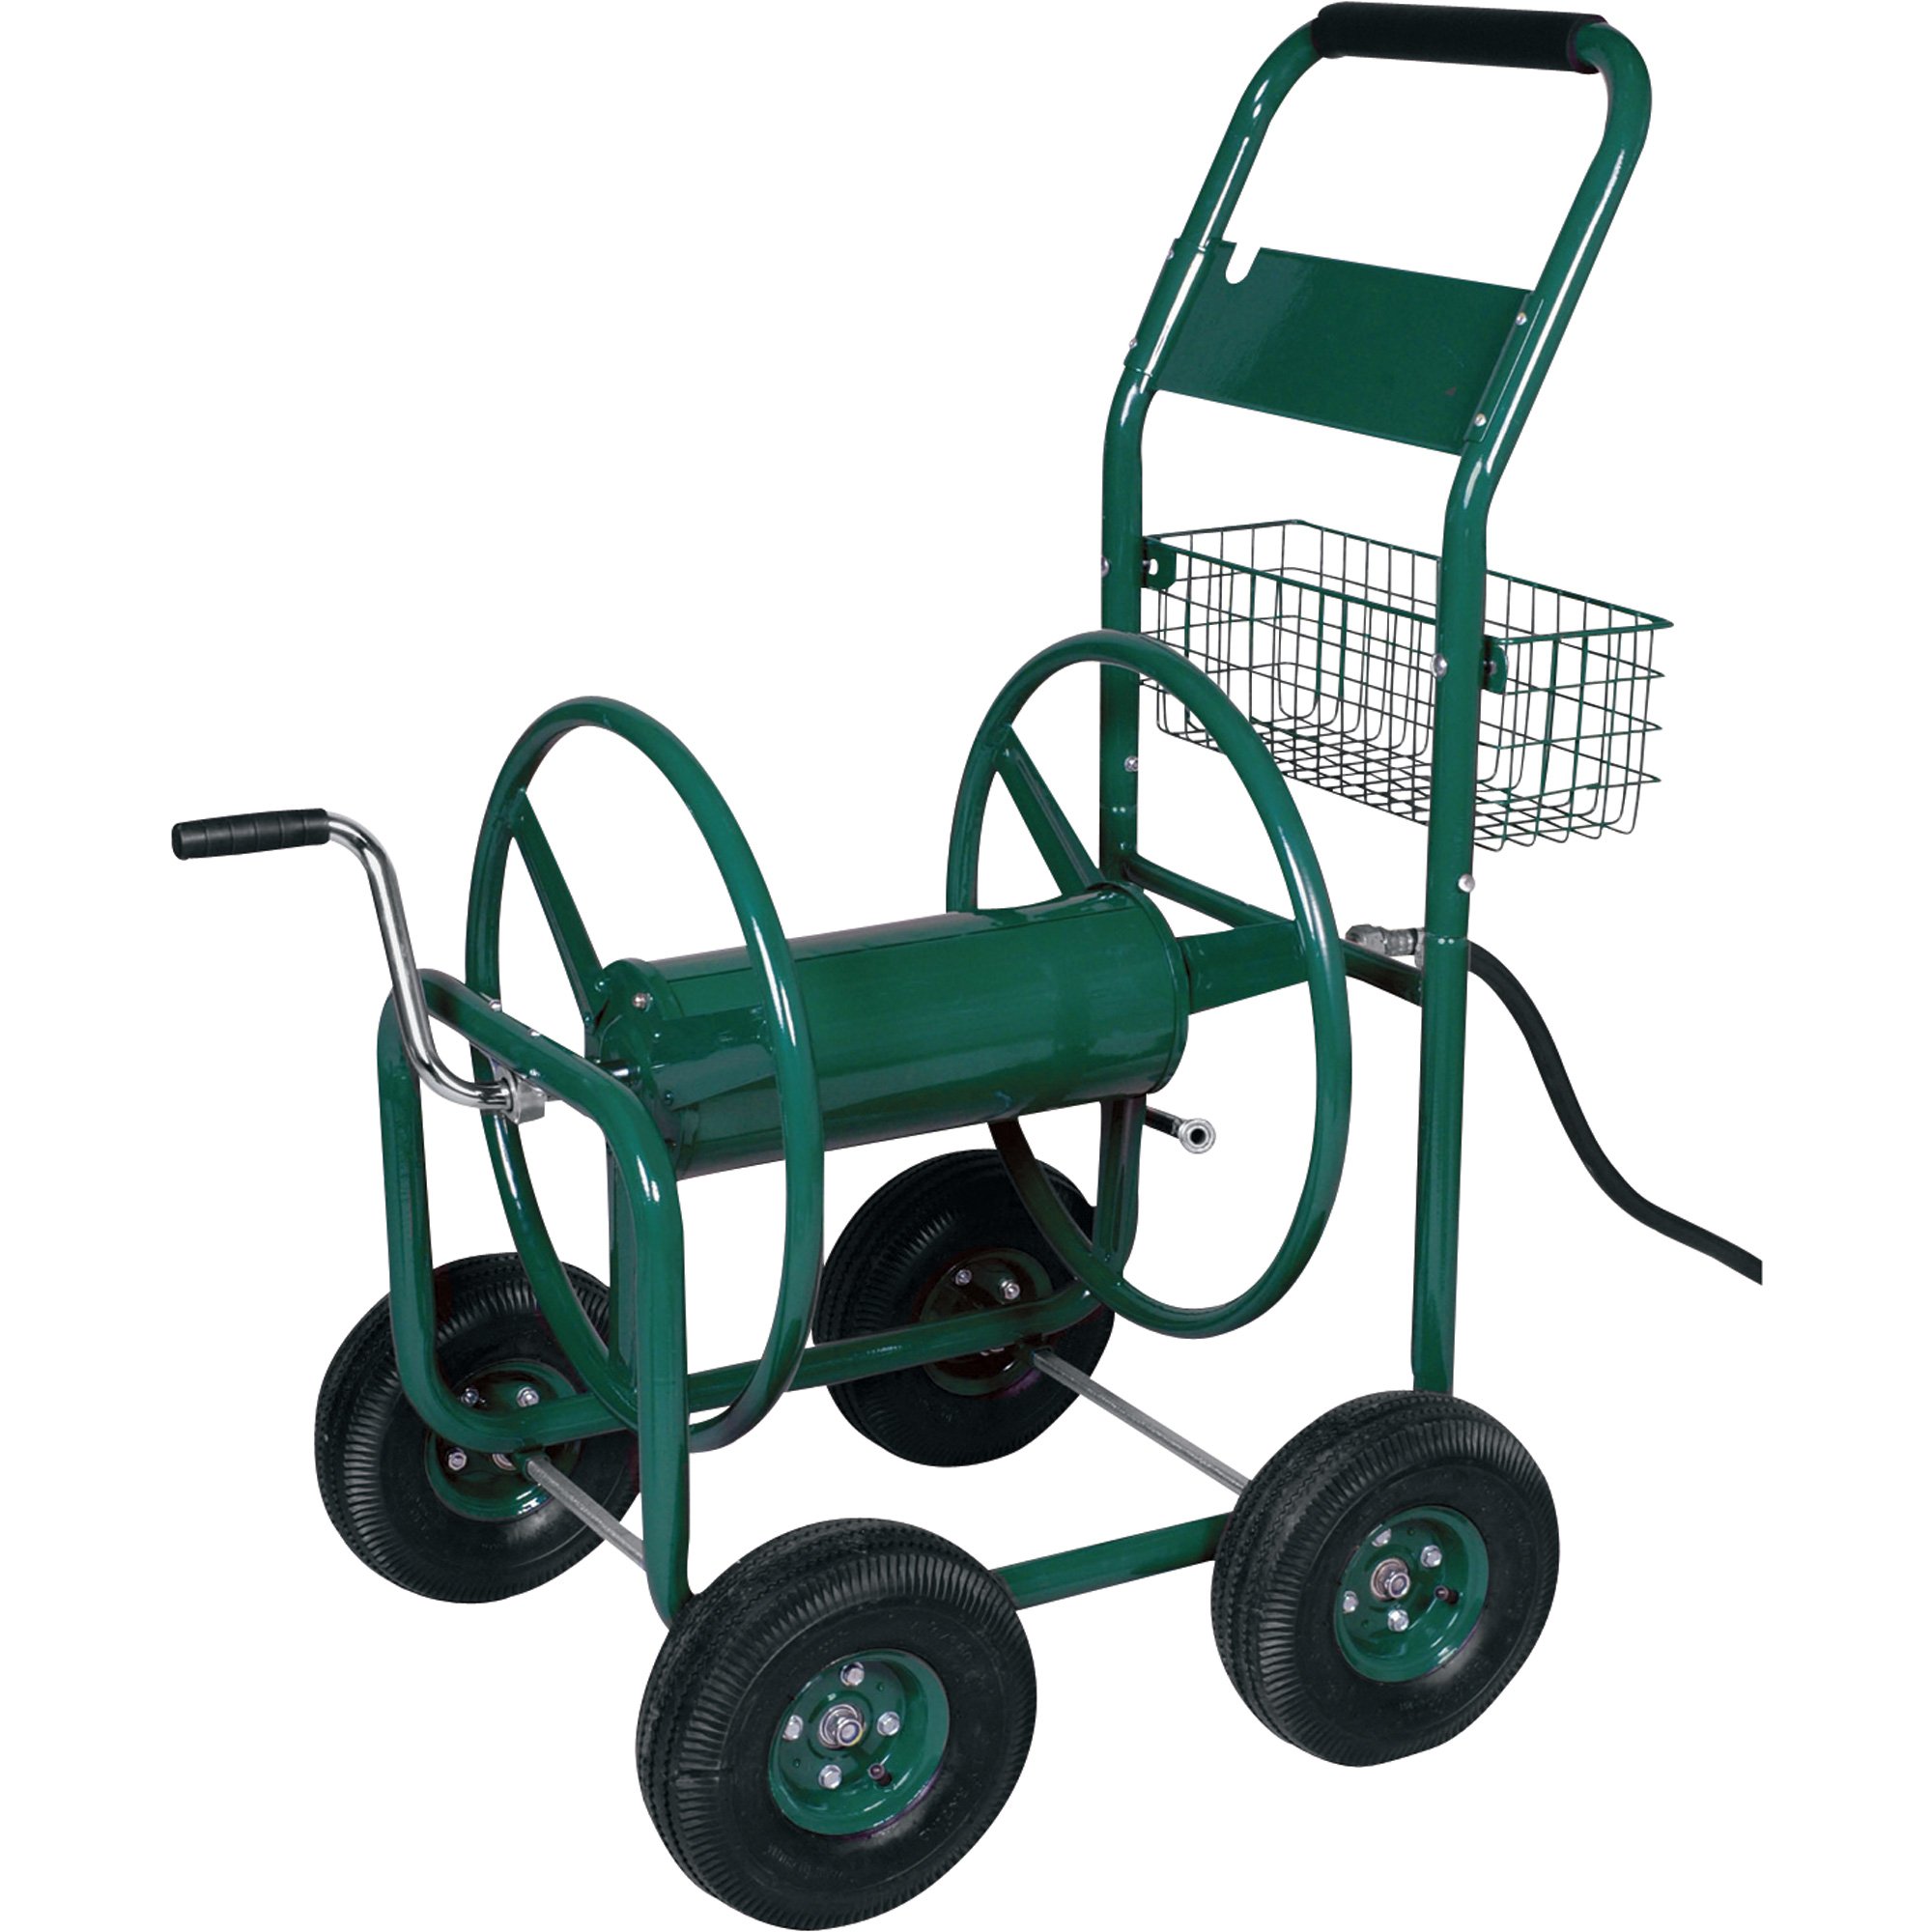 Please see replacement item# 163152. Northern Industrial Garden Hose Reel  Cart